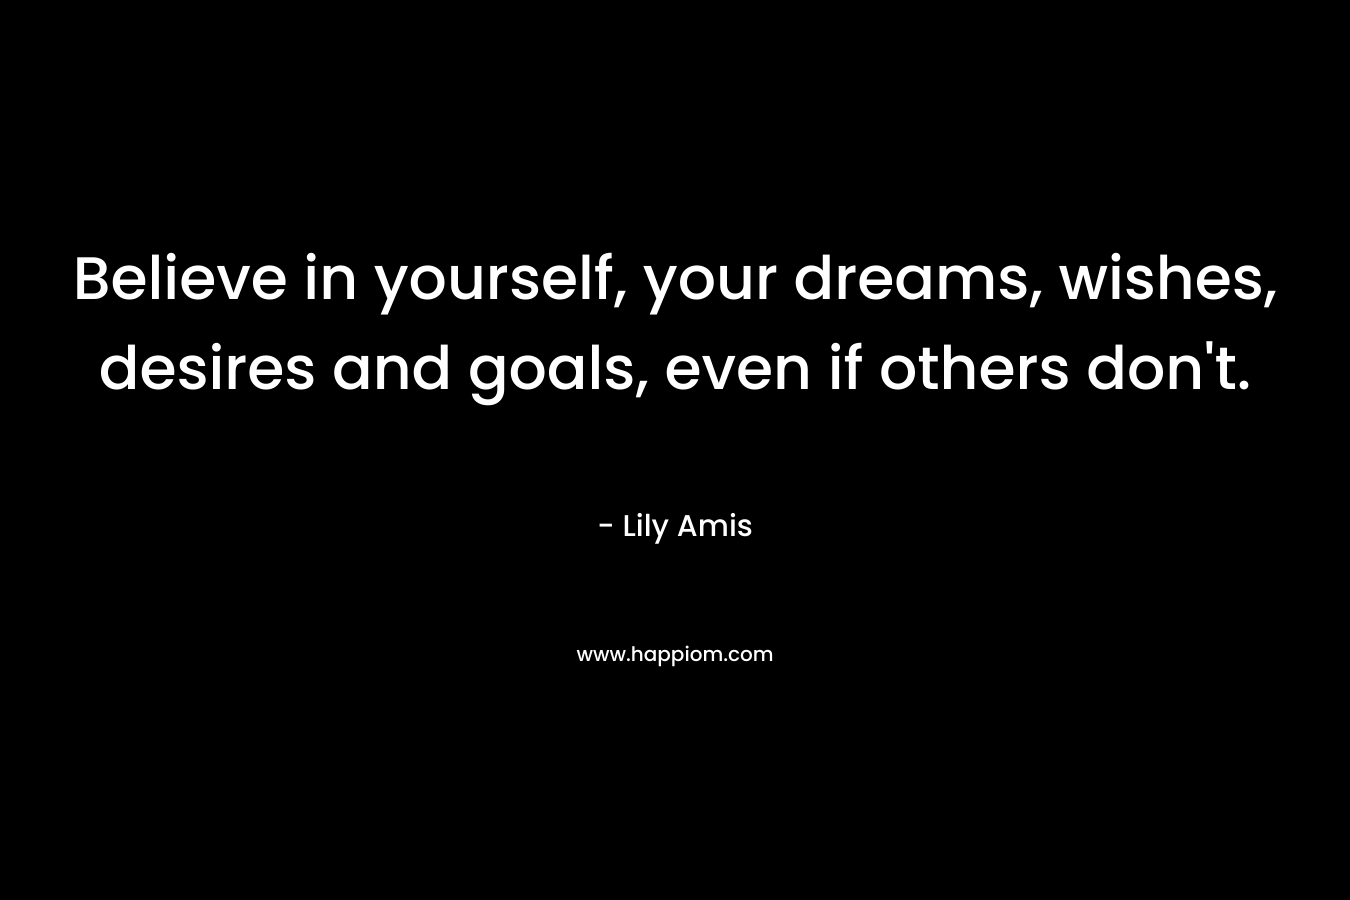 Believe in yourself, your dreams, wishes, desires and goals, even if others don't.